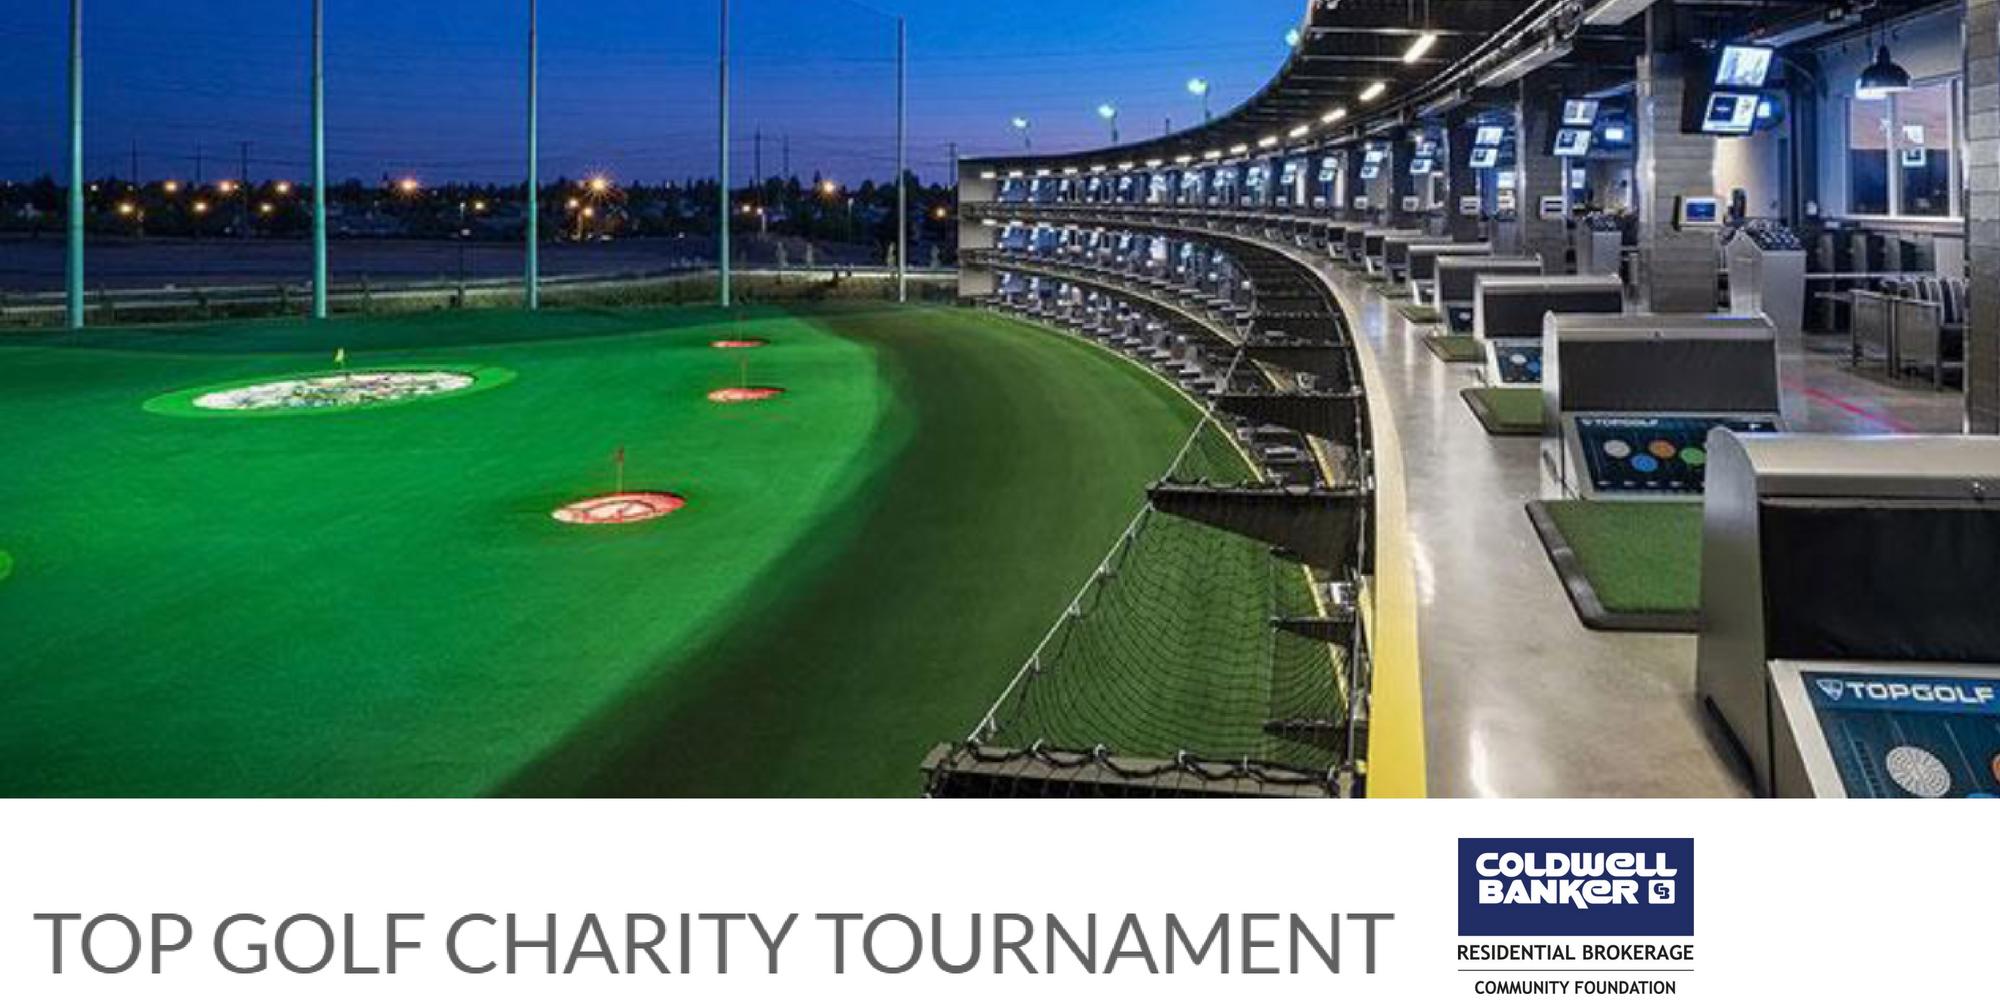 Coldwell Banker Community Foundation Top Golf Charity Tournament